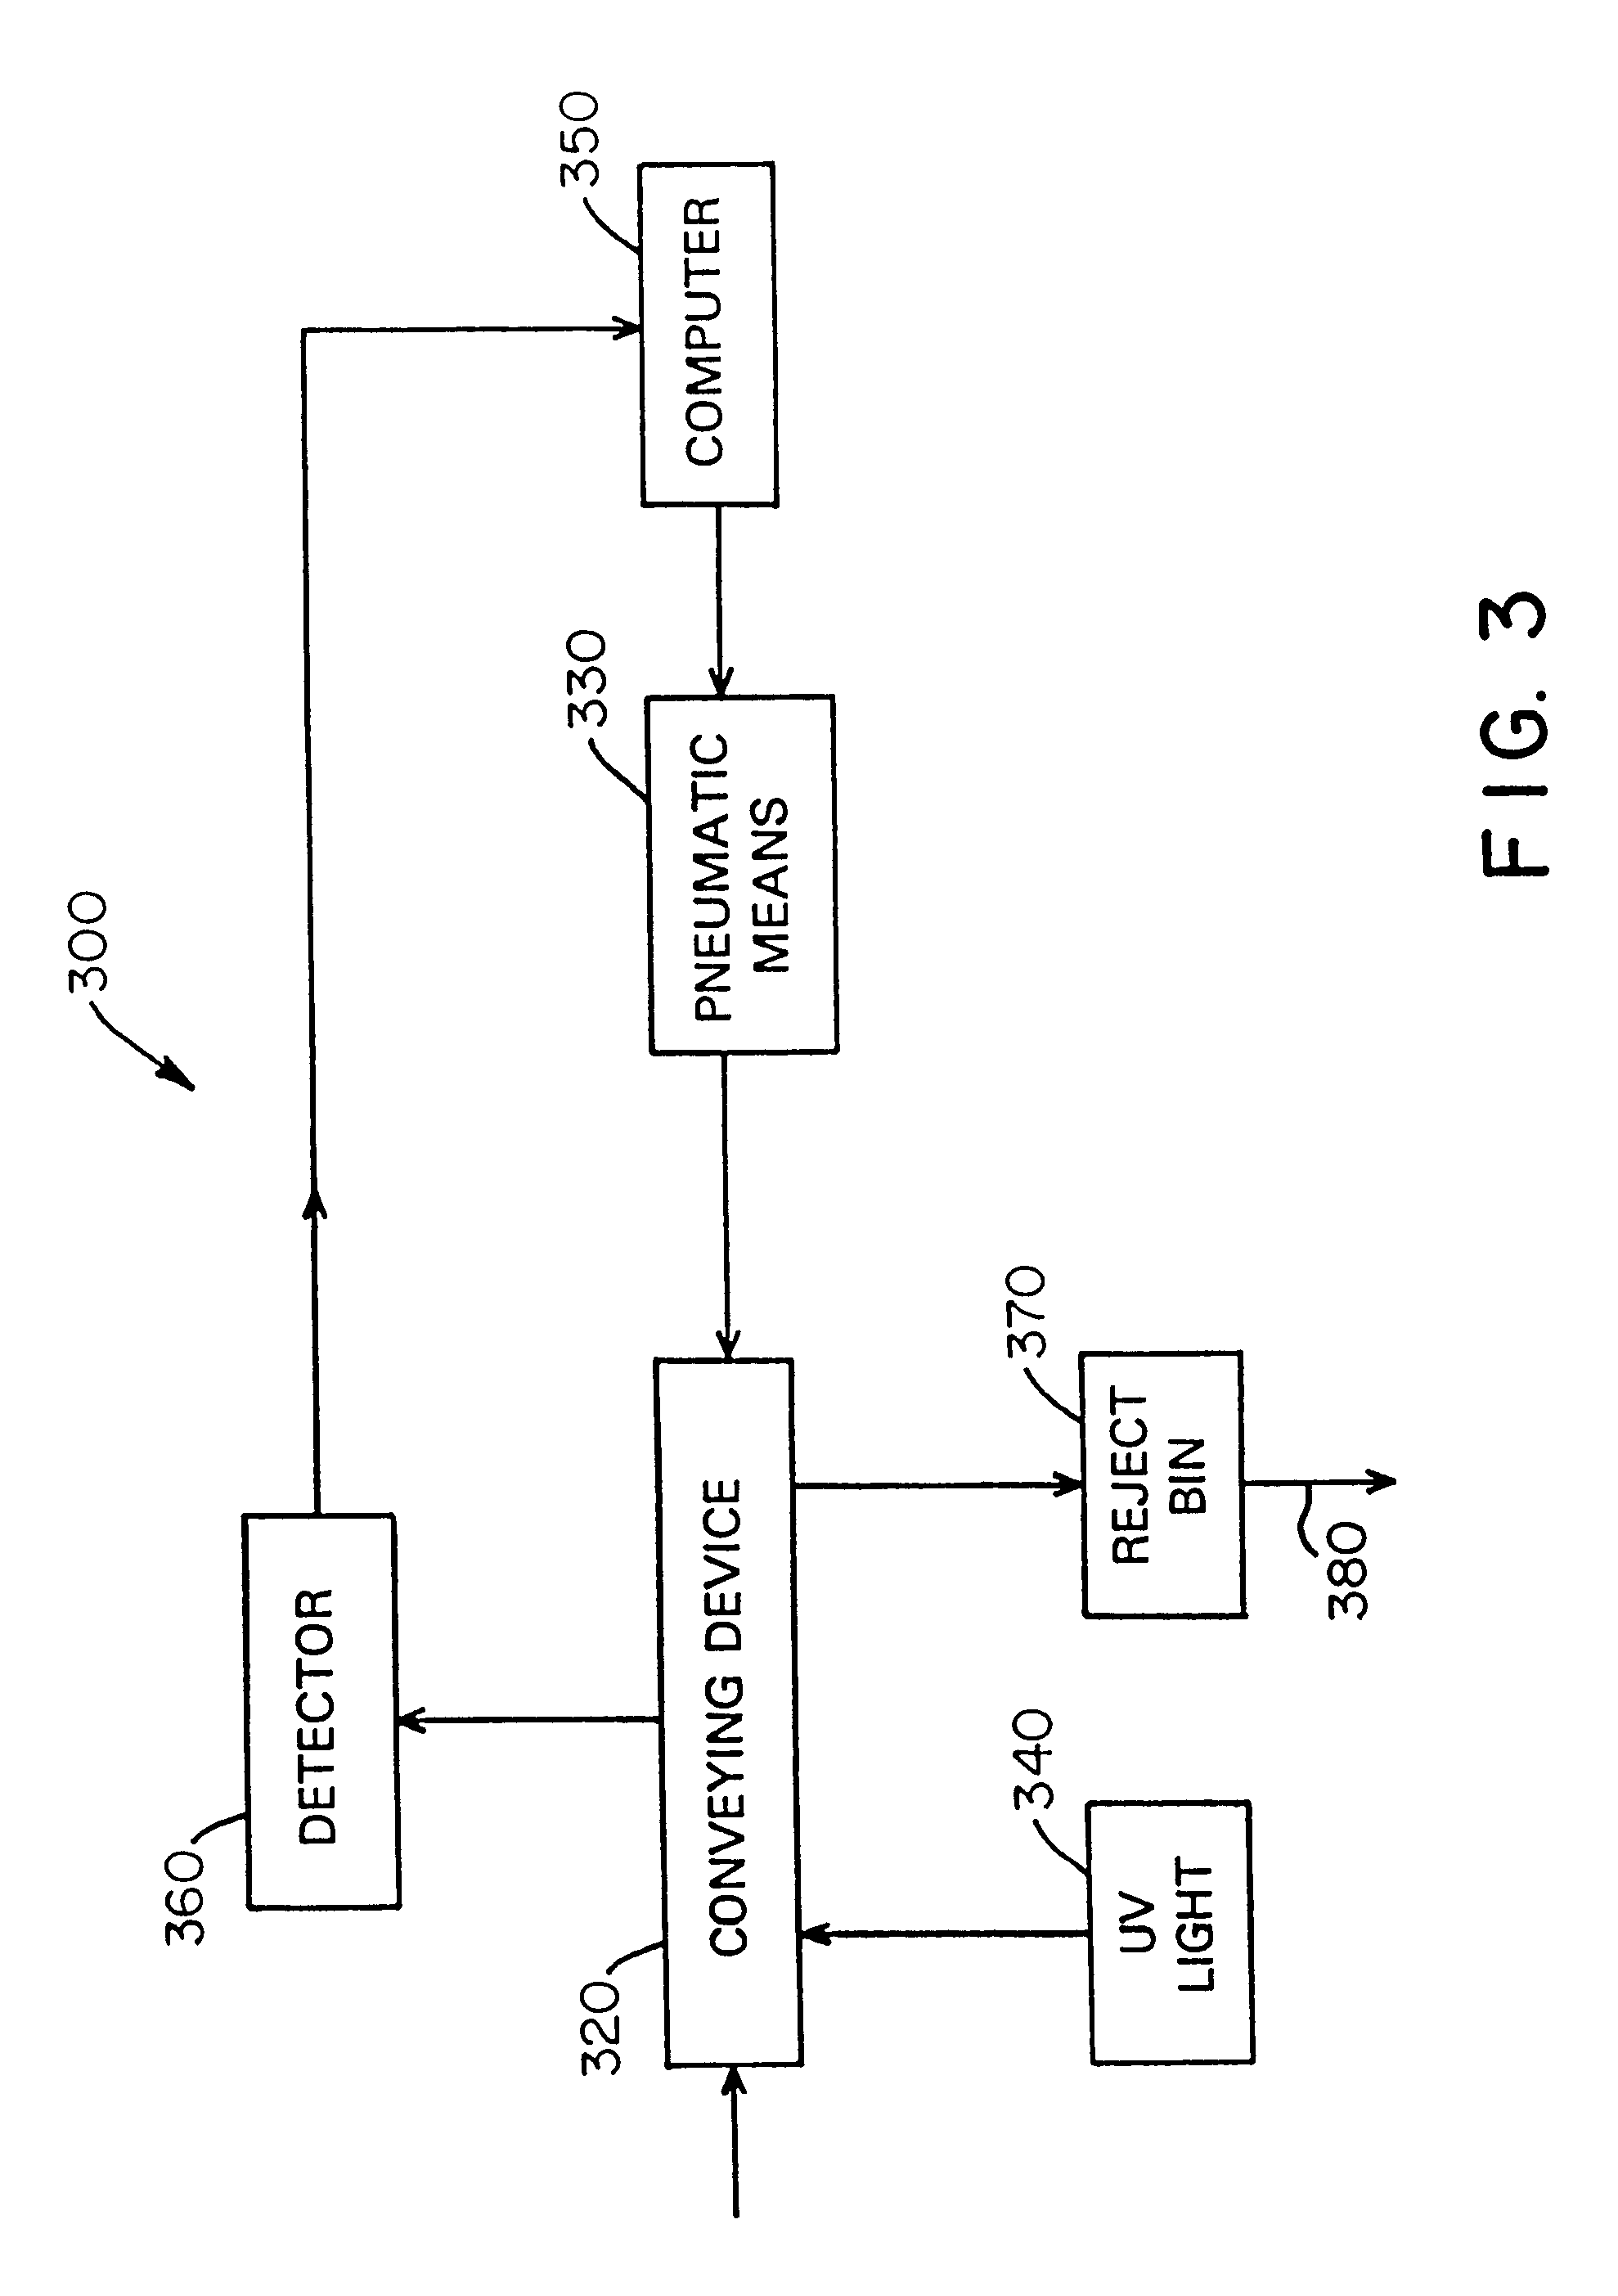 Method for assay and removal of harmful toxins during processing of tobacco products